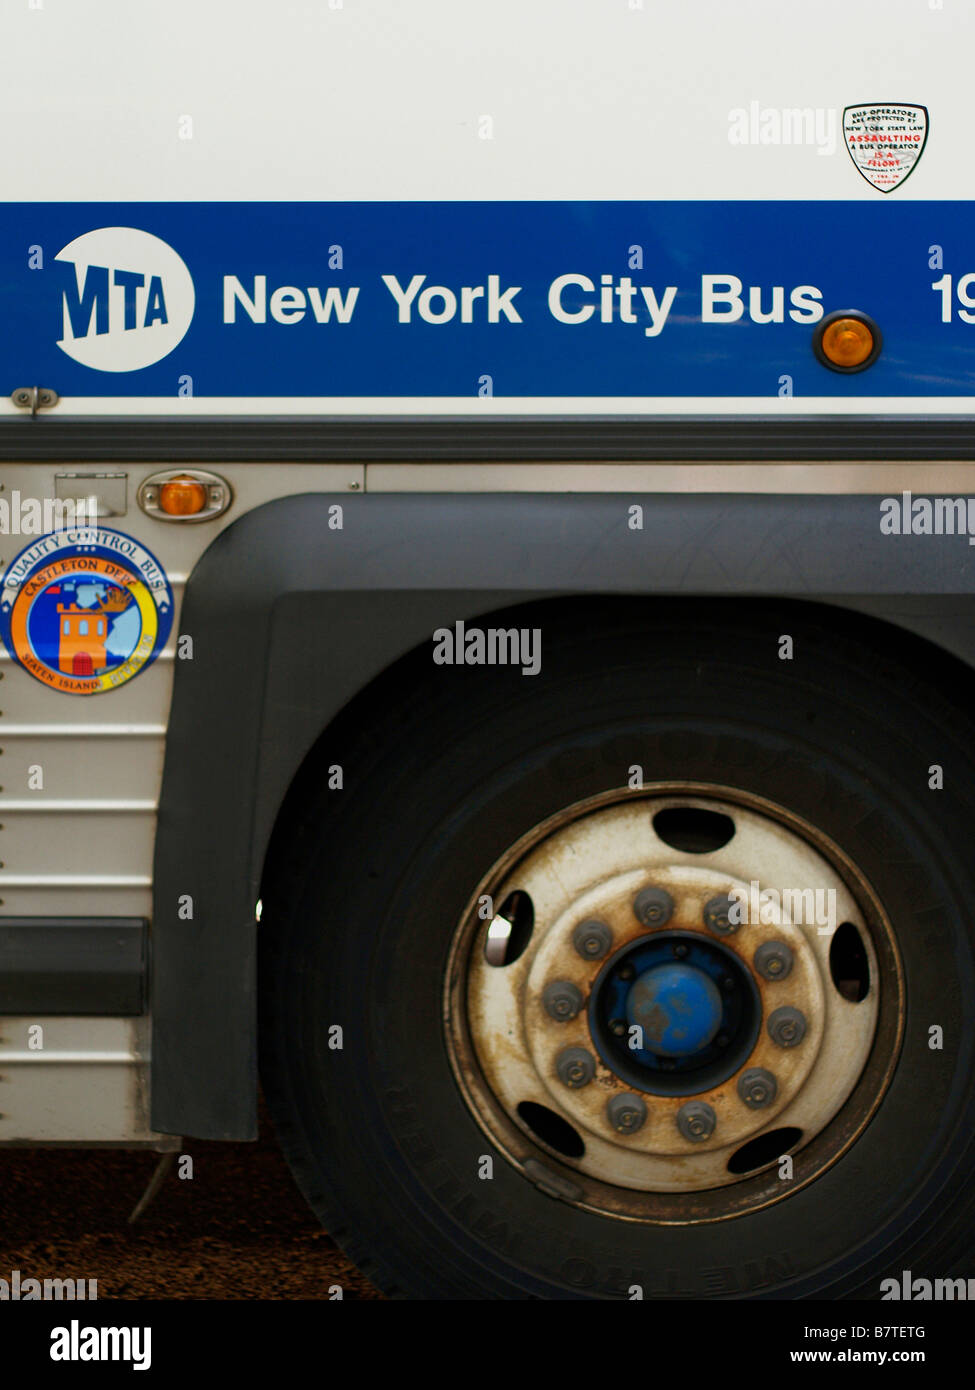 Wheel and side of a New York City MTA bus showing MTA logo. Stock Photo